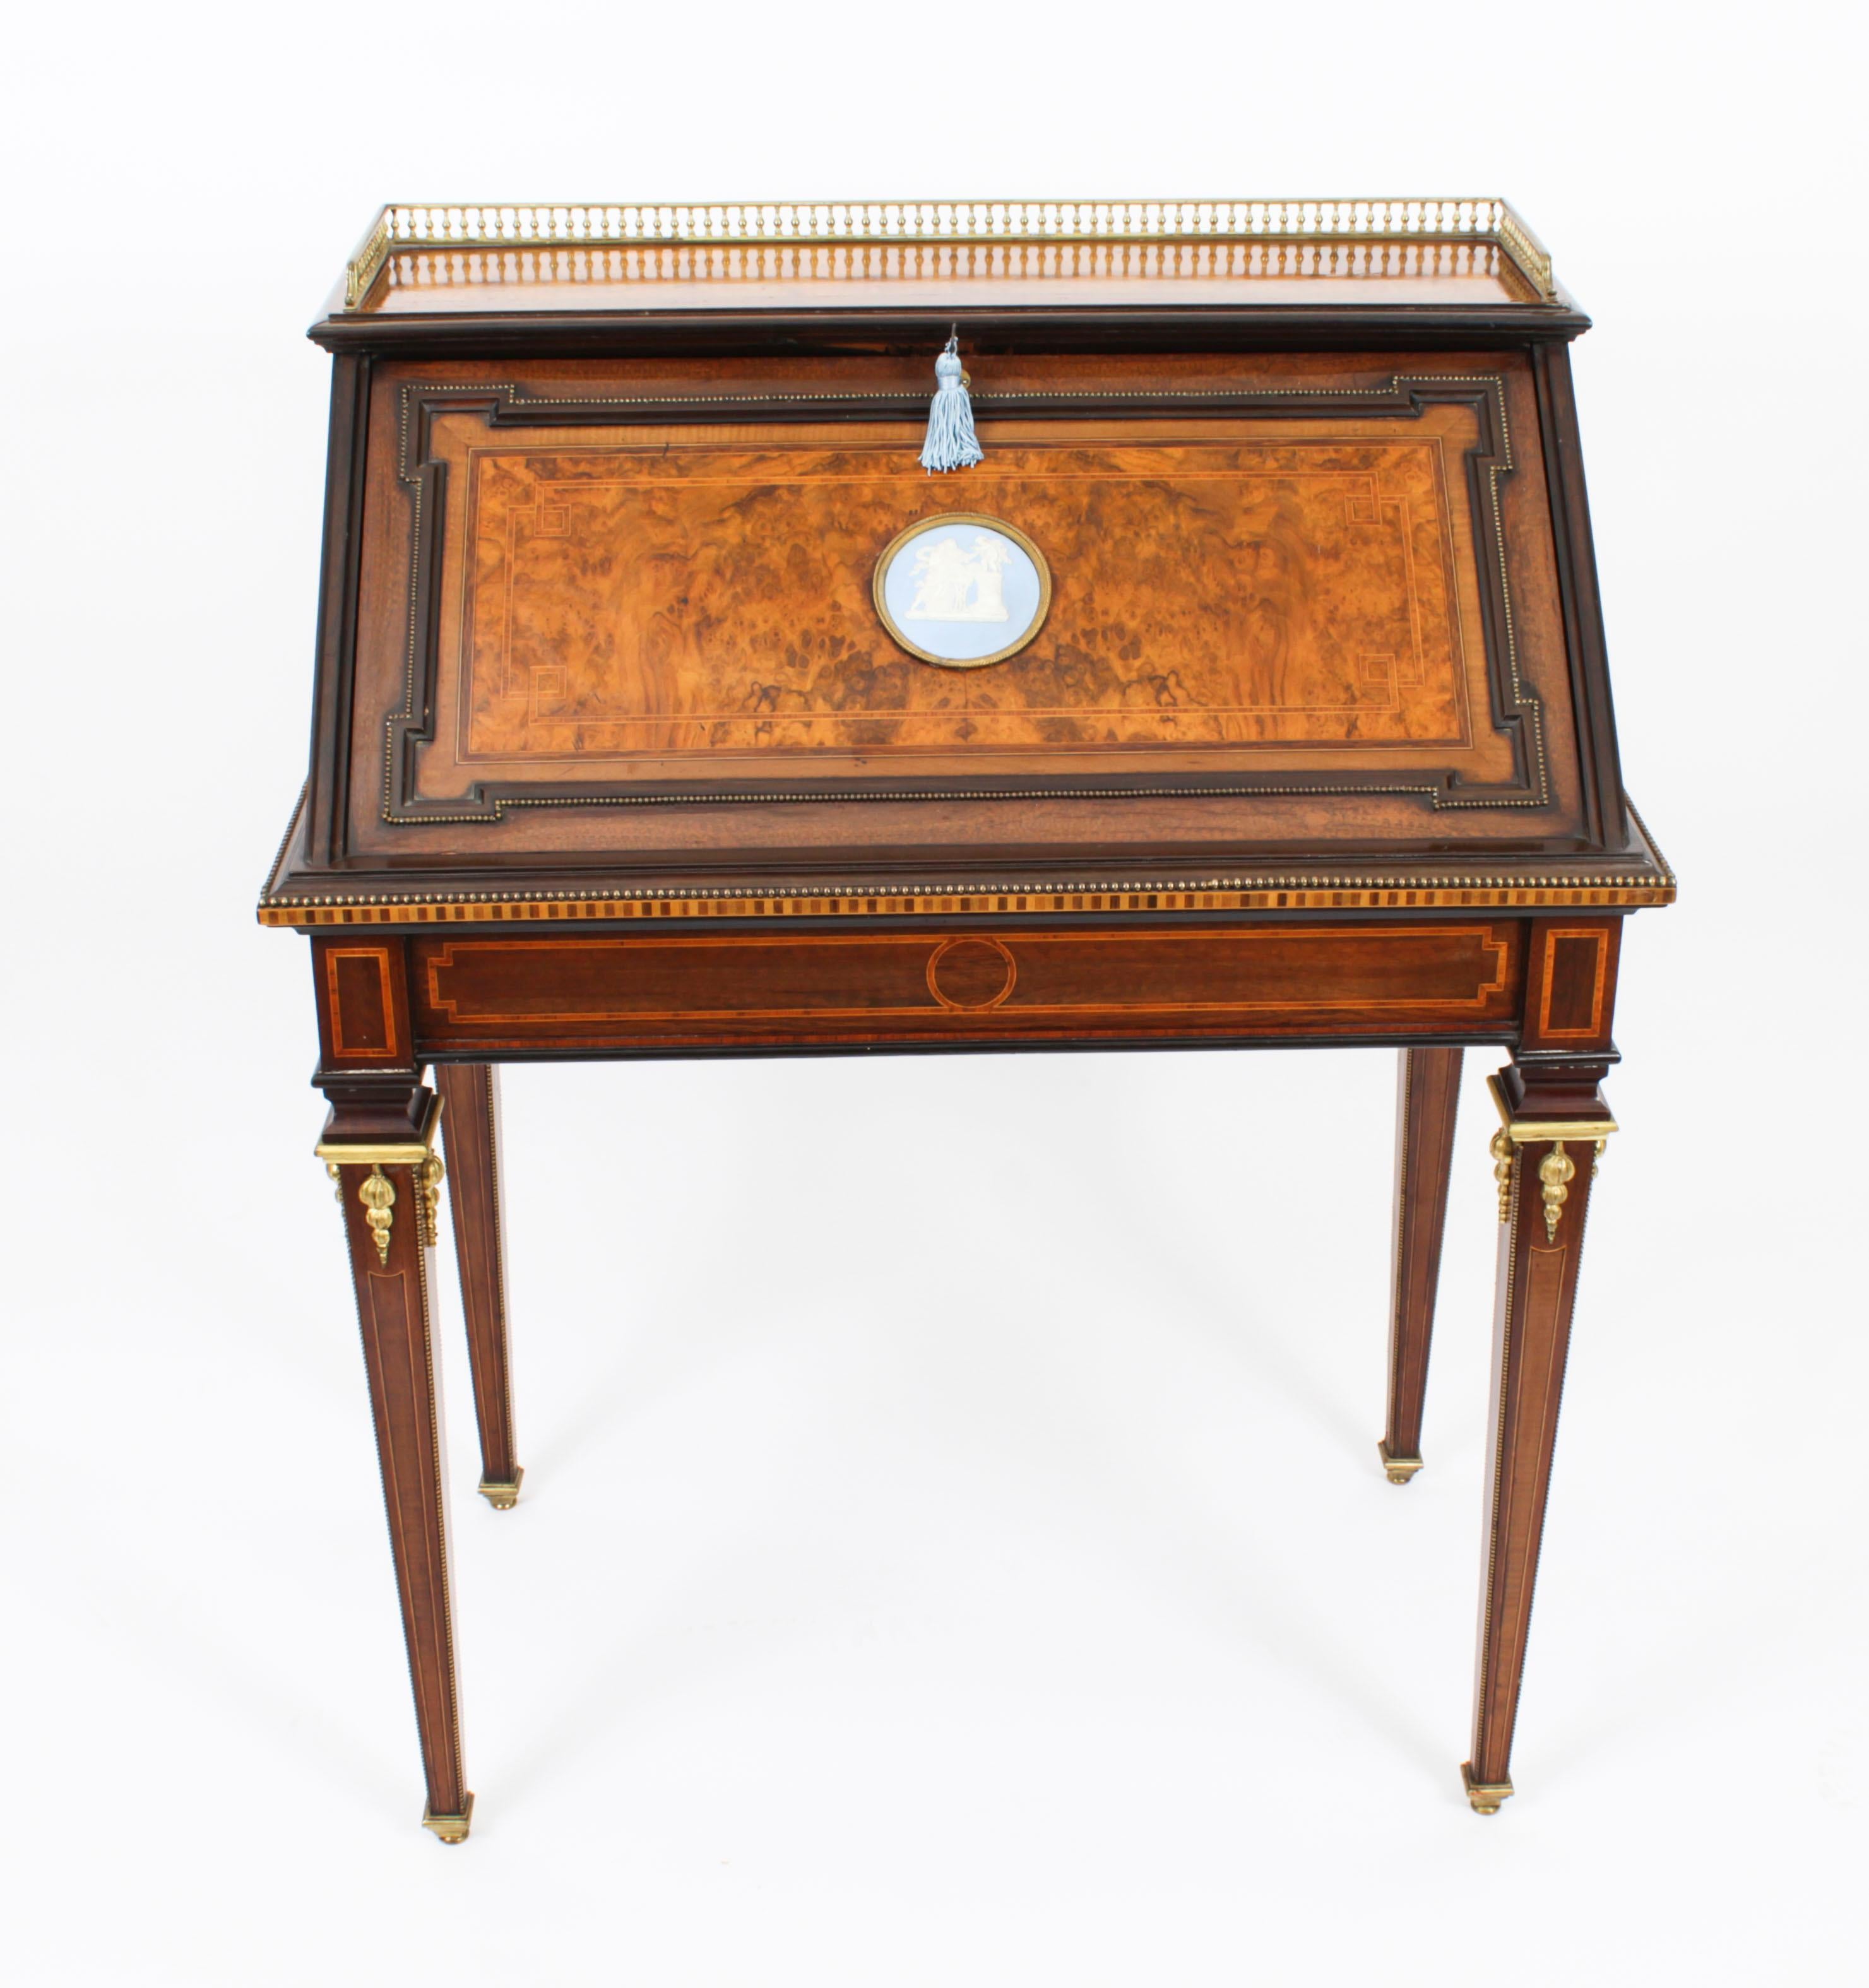 A superb Victorian burr walnut parquetry and ormolu mounted Bureau De Dame, circa 1870 in date.
 
The fall front features a decorative Jasperware ormolu mounted plaque and opens to reveal a satinwood fitted interior with a large pigeon hole, three